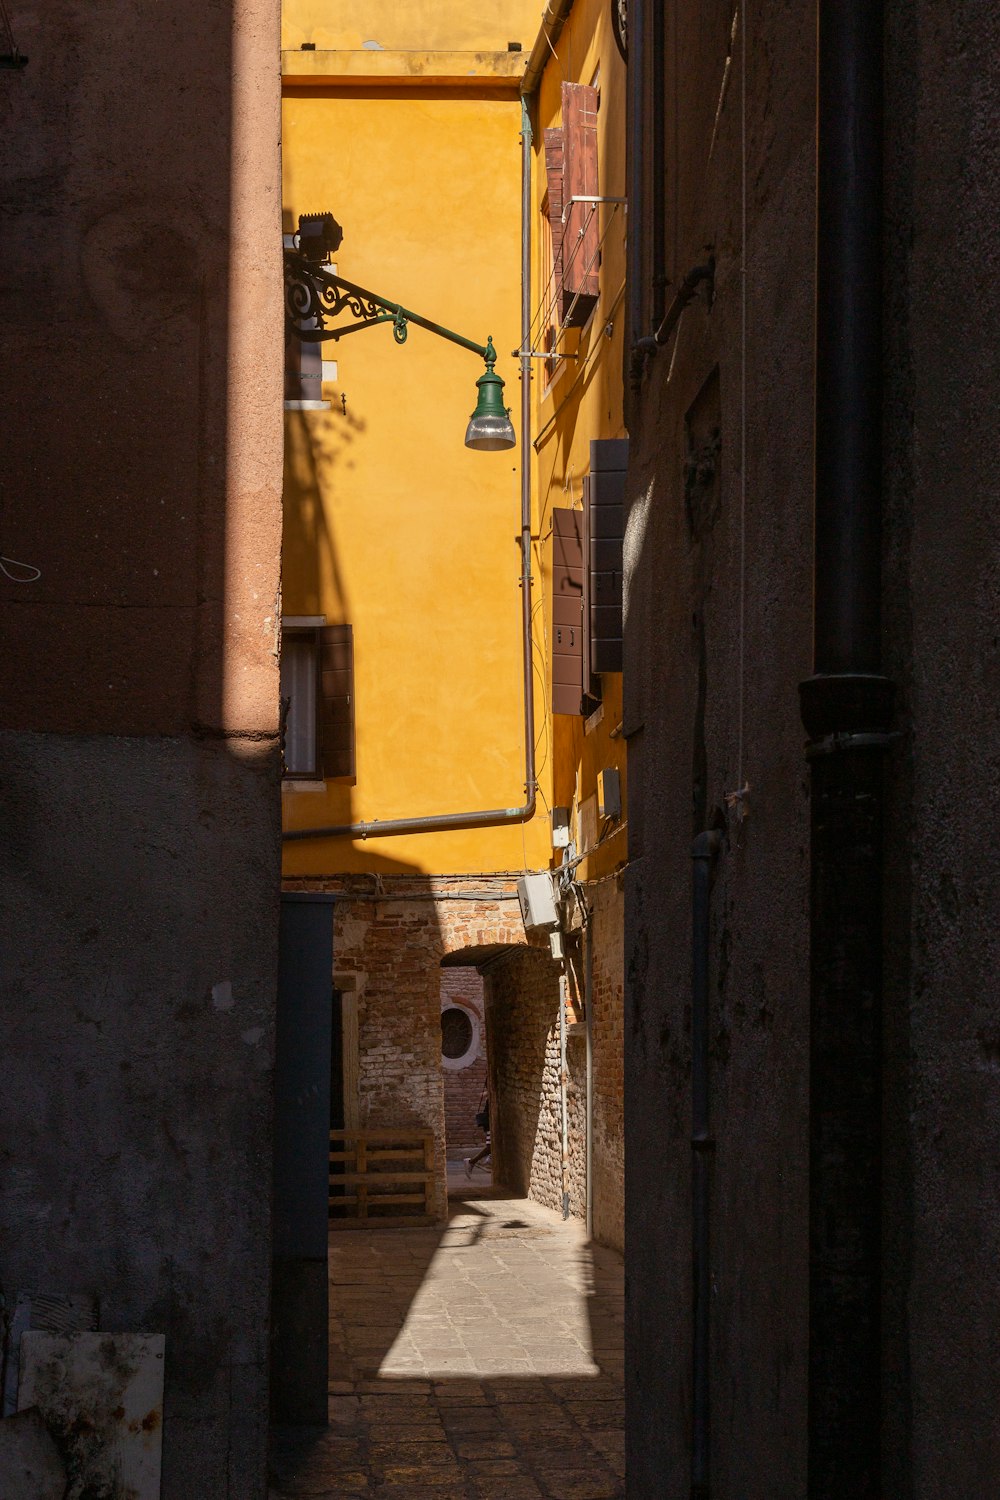 a narrow alley way with a yellow building in the background